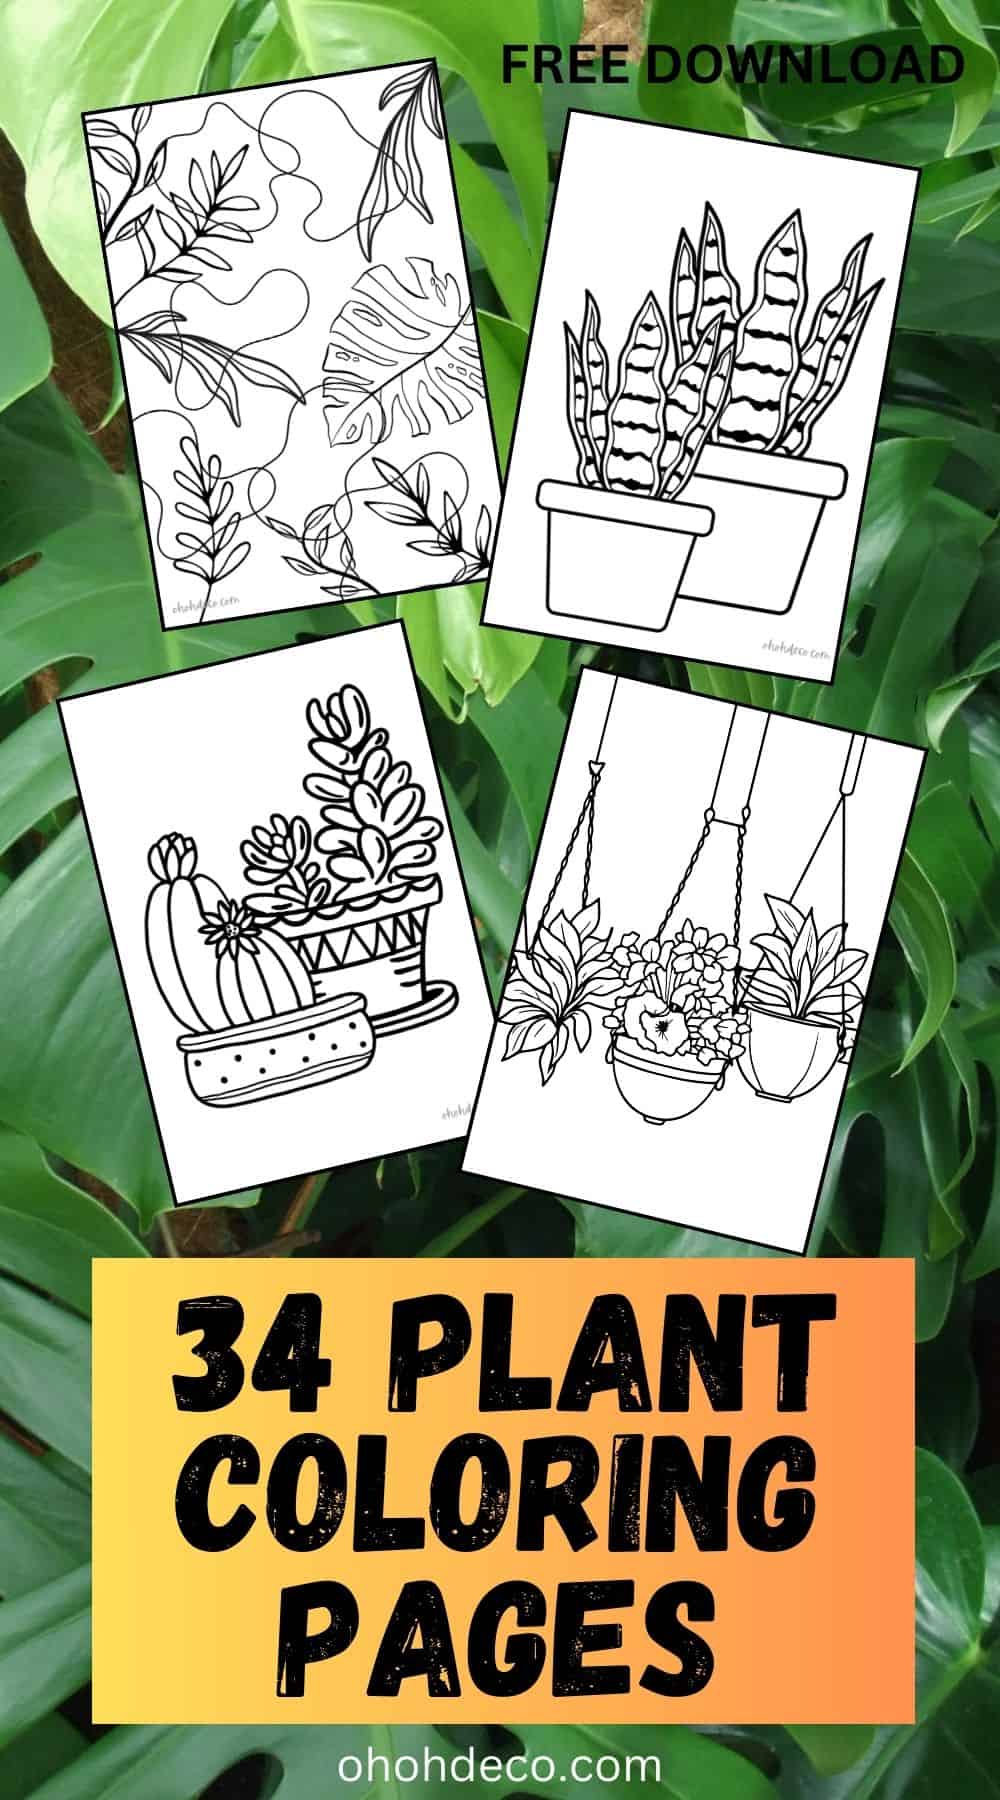 Plant coloring pages free download